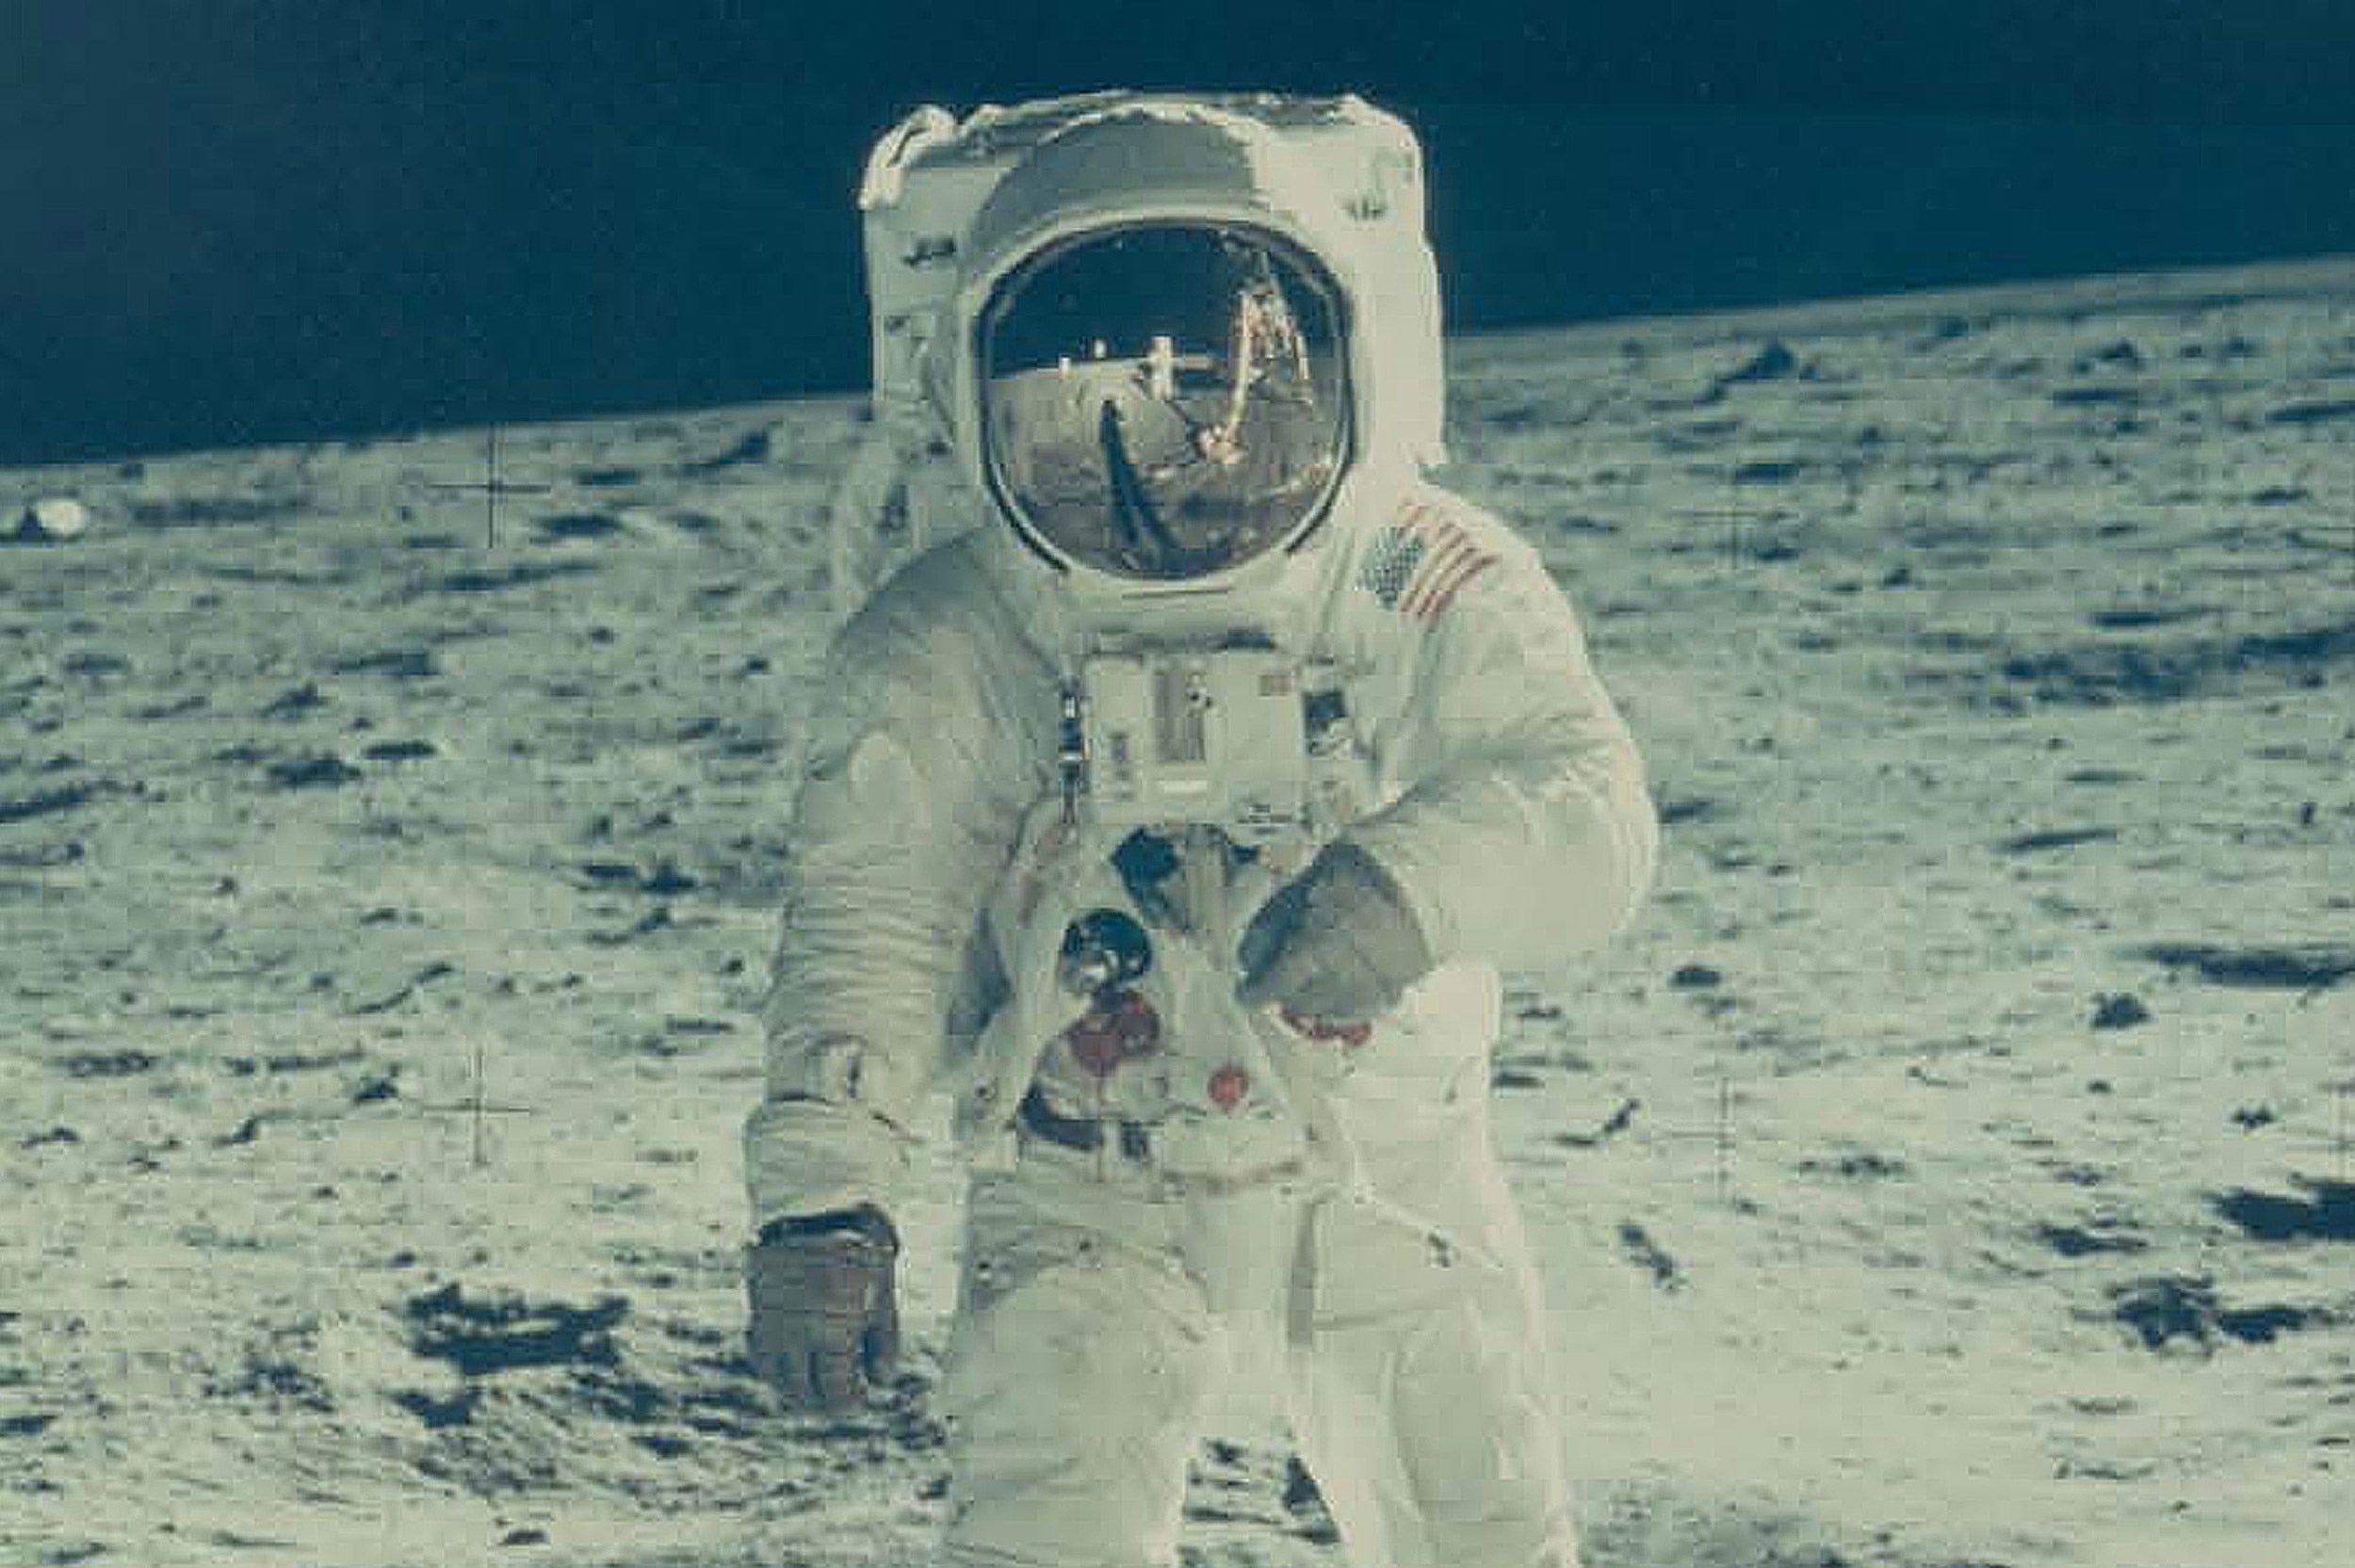 Buzz Aldrin on the moon with Neil Armstrong reflected in his visor.